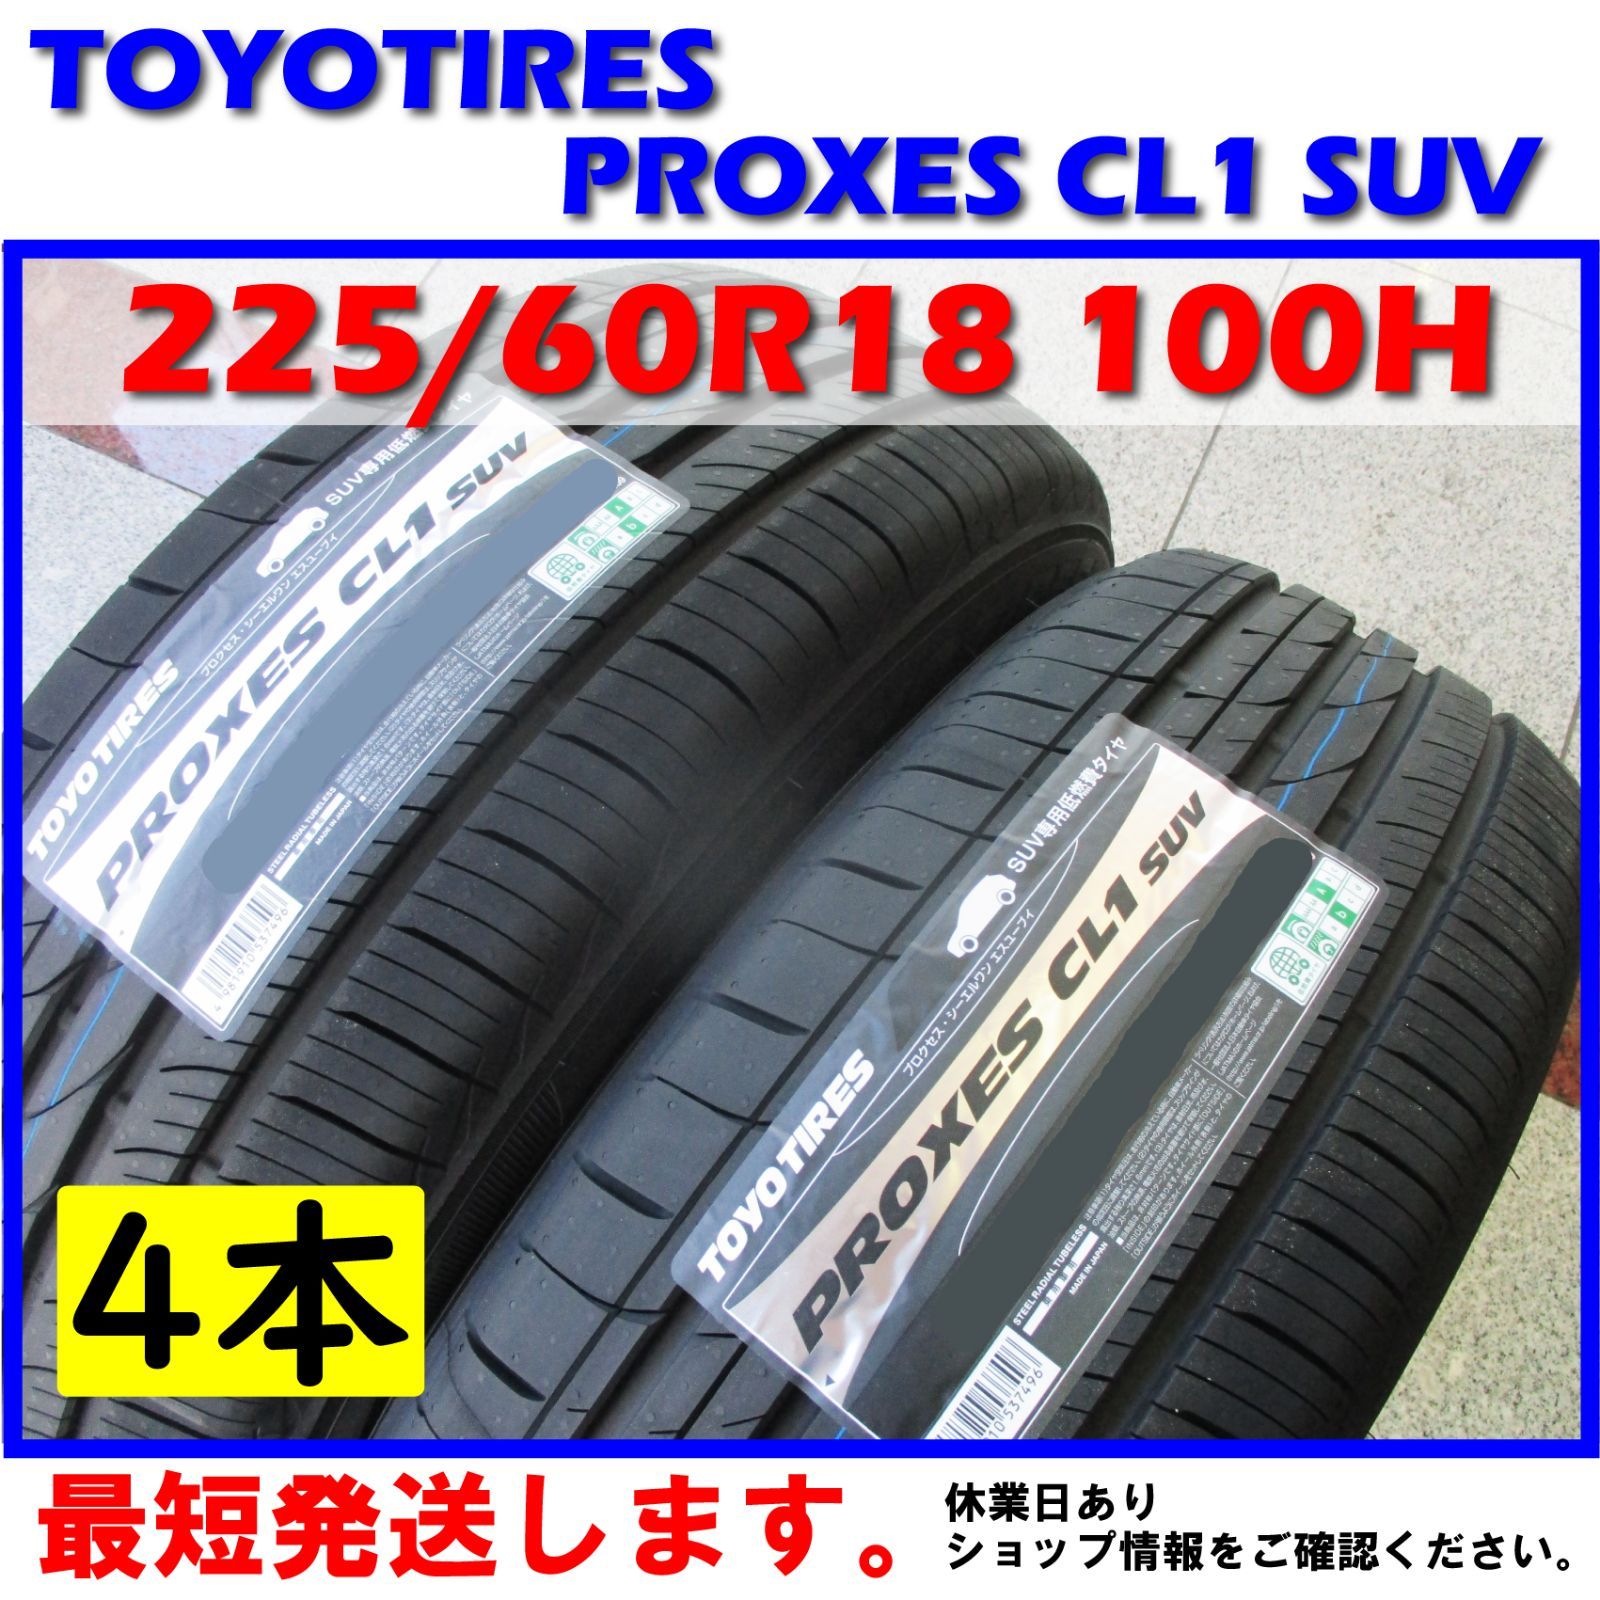 PROXES CL1 SUV 225 60R18 100H プロクセス - 2